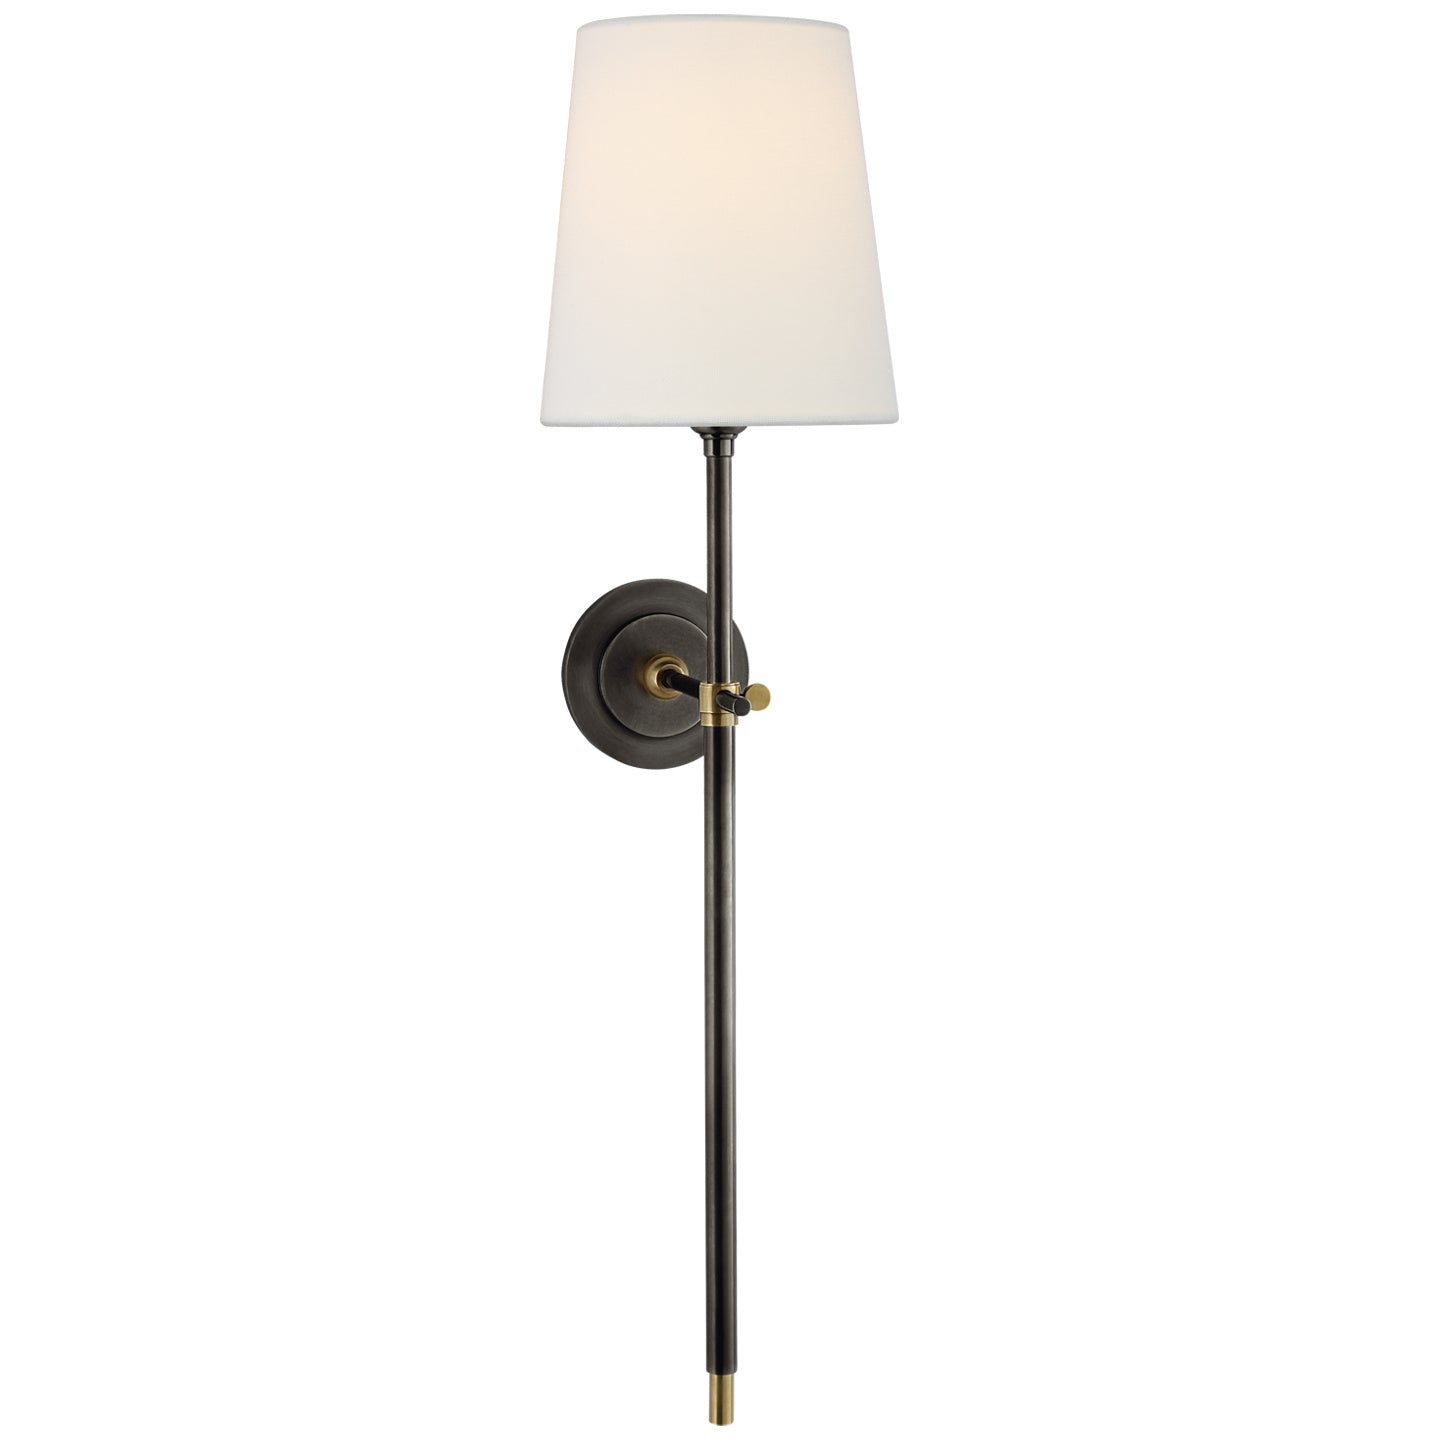 Visual Comfort Signature - TOB 2024BZ/HAB-L - One Light Wall Sconce - Bryant - Bronze and Hand-Rubbed Antique Brass